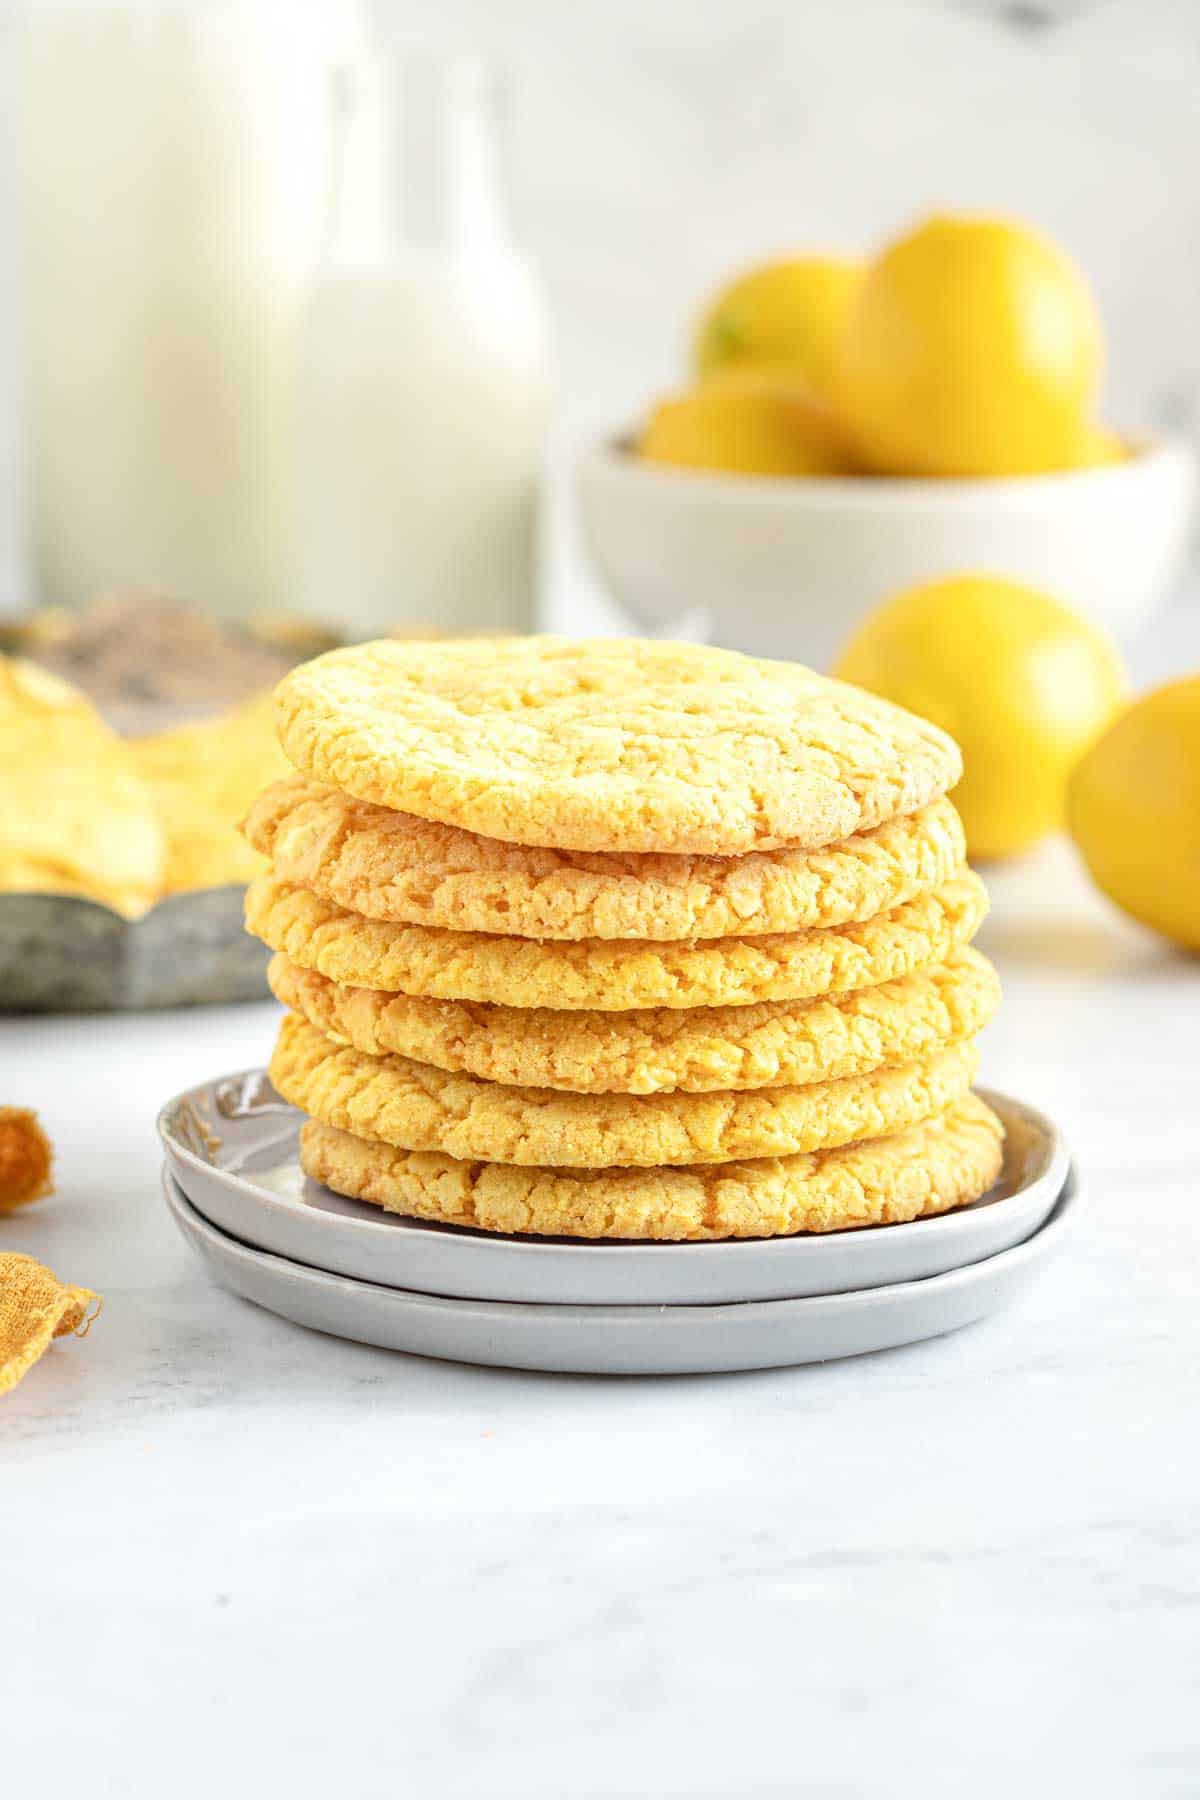 A stack of textured lemon crinkle cookies on a gray plate, with lemons and glass milk bottles in the background.